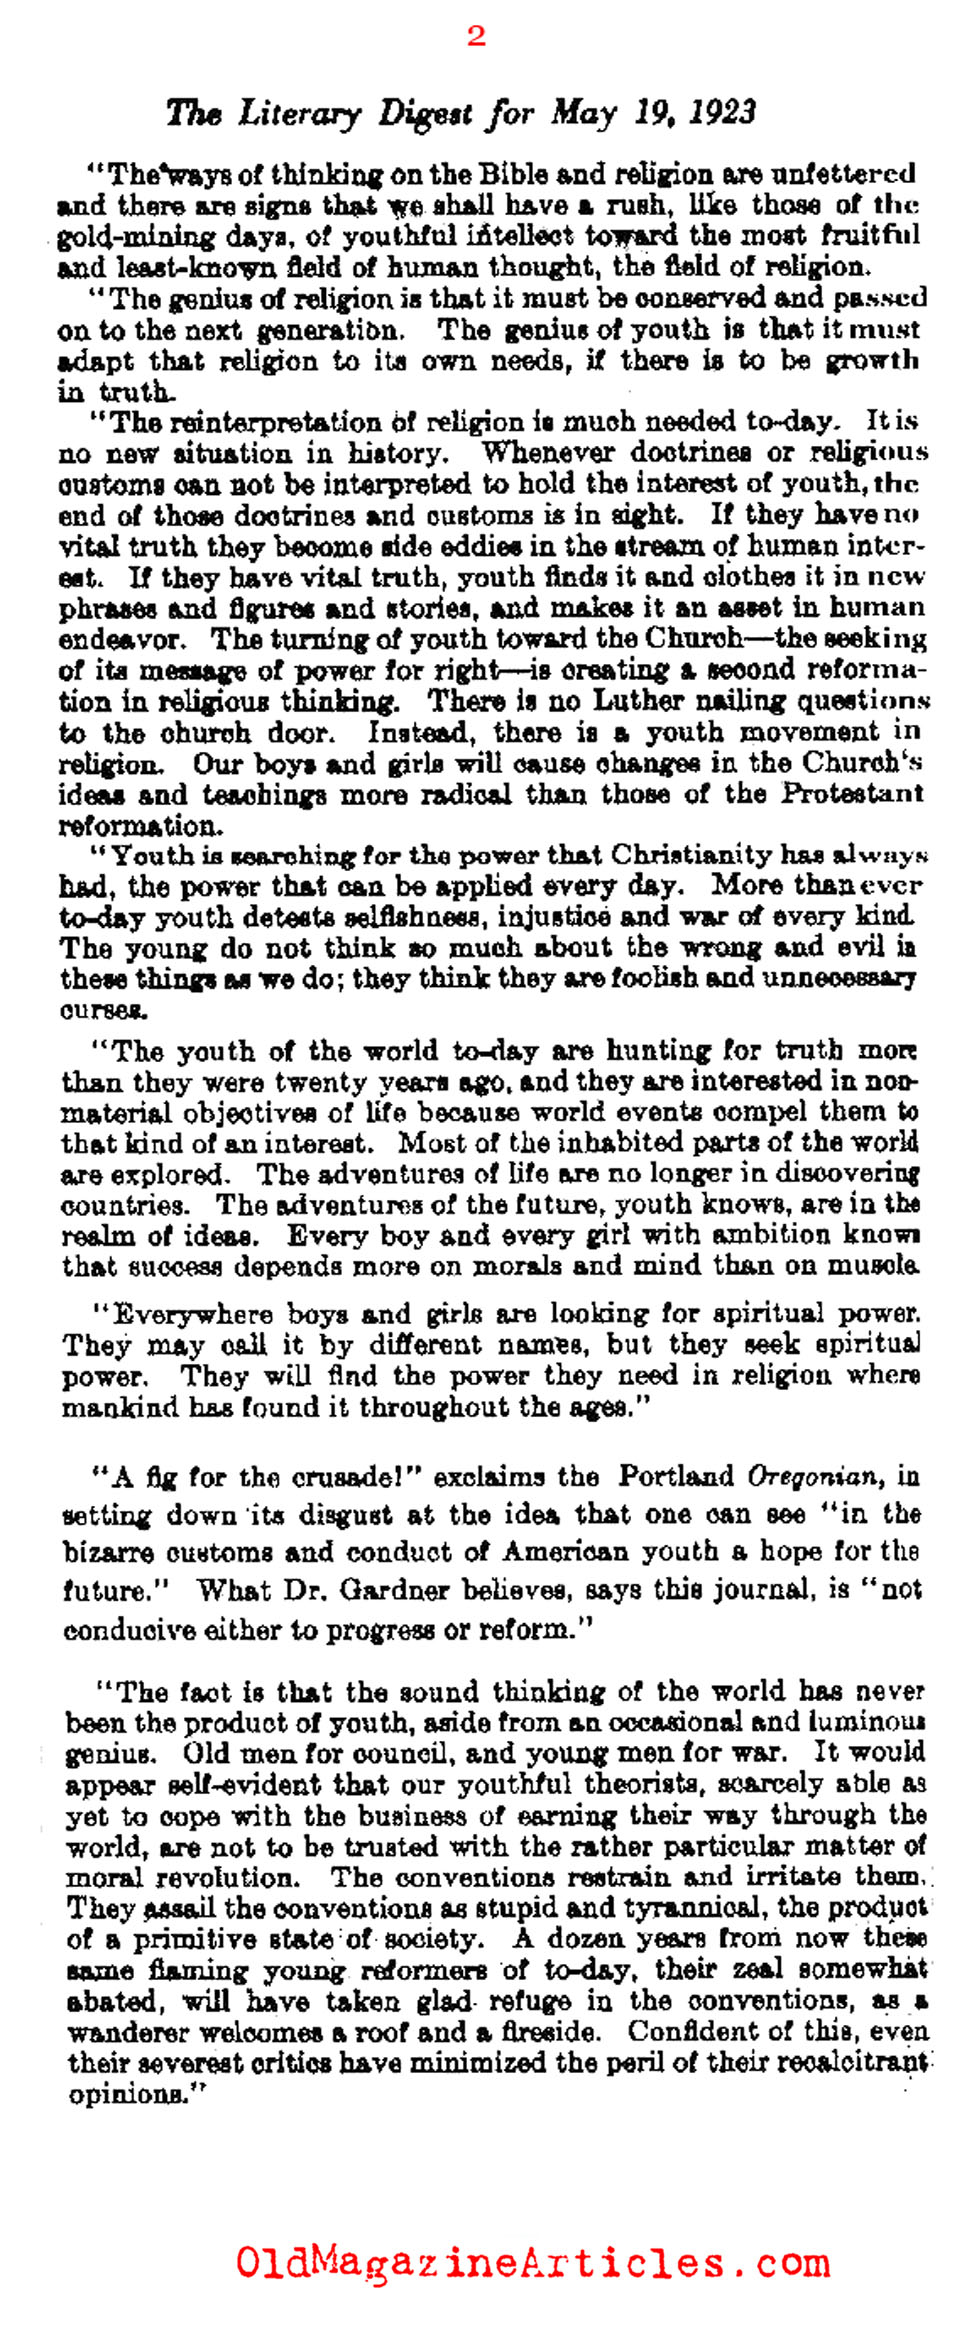 The Flapper as a Religious Force in the World  (Literary Digest, 1927)